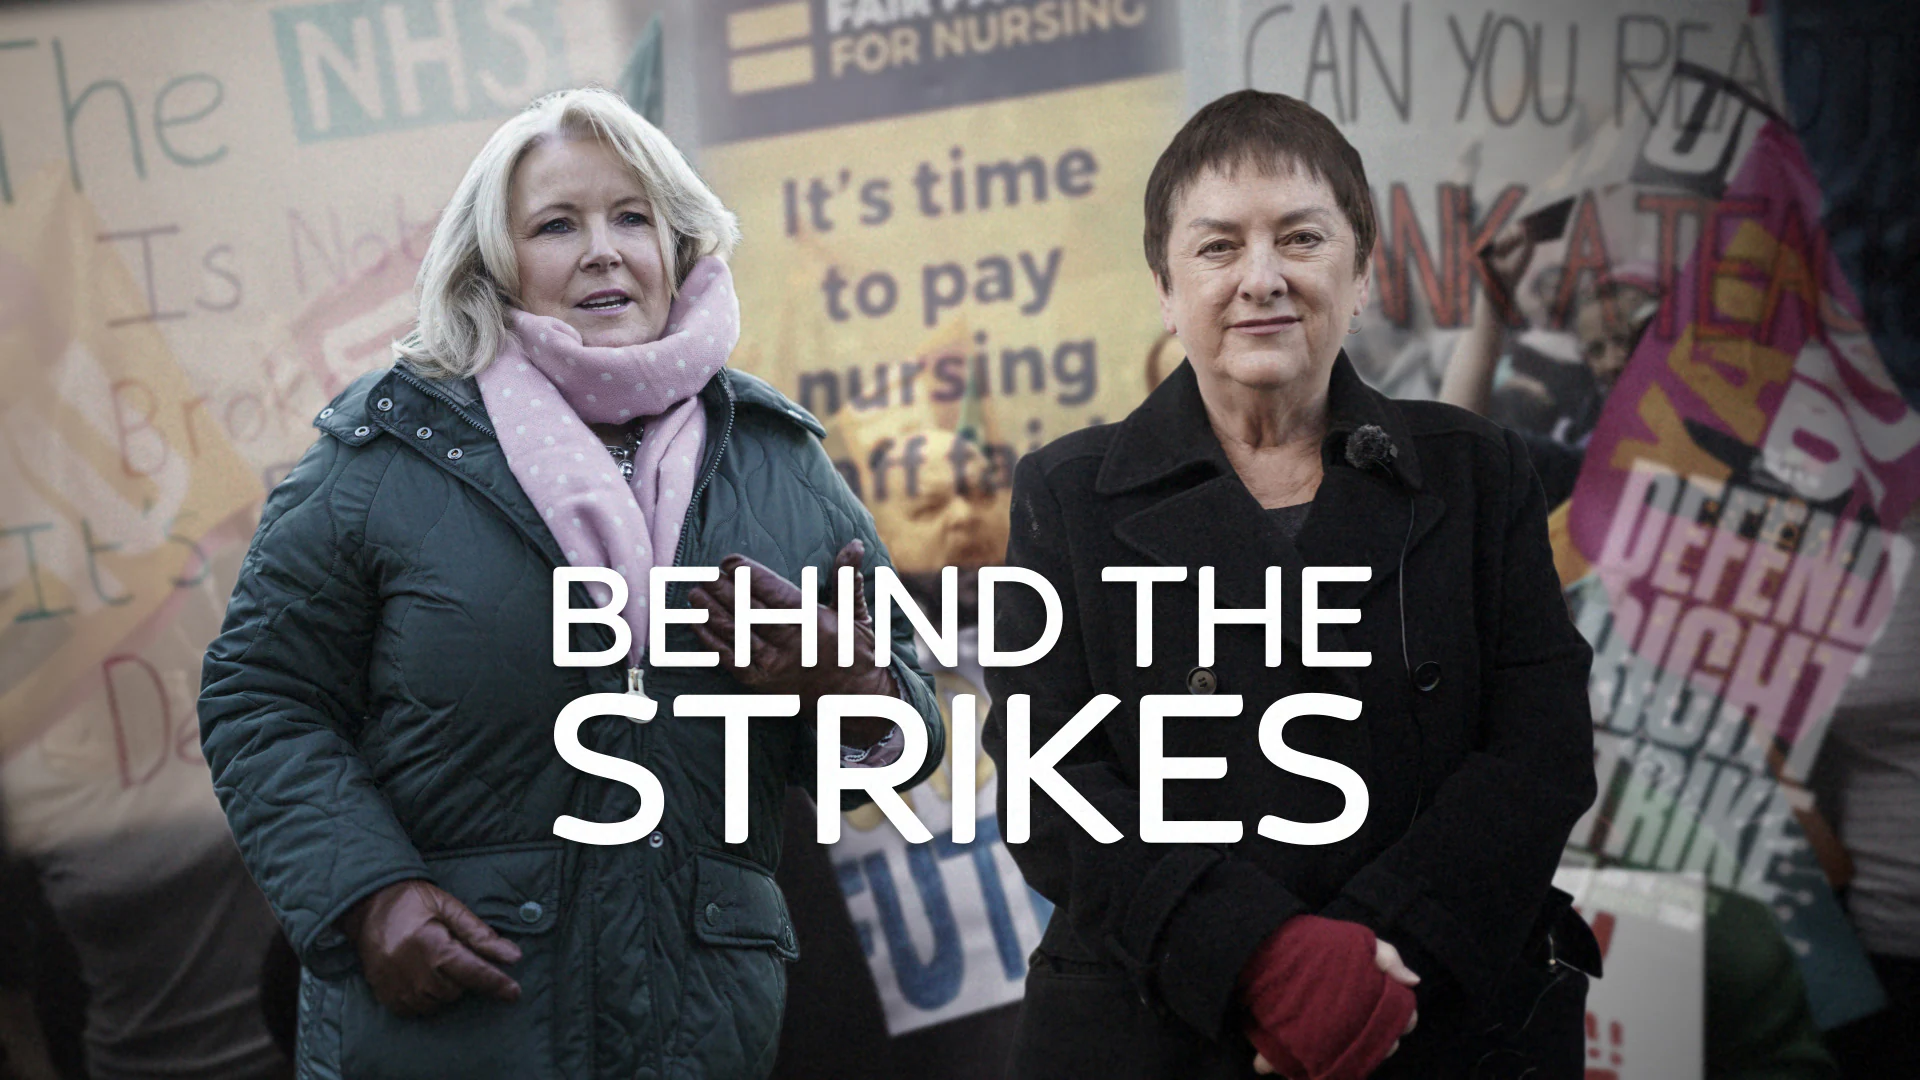 Sky News presents, Behind the Strikes: the story of two female union leaders